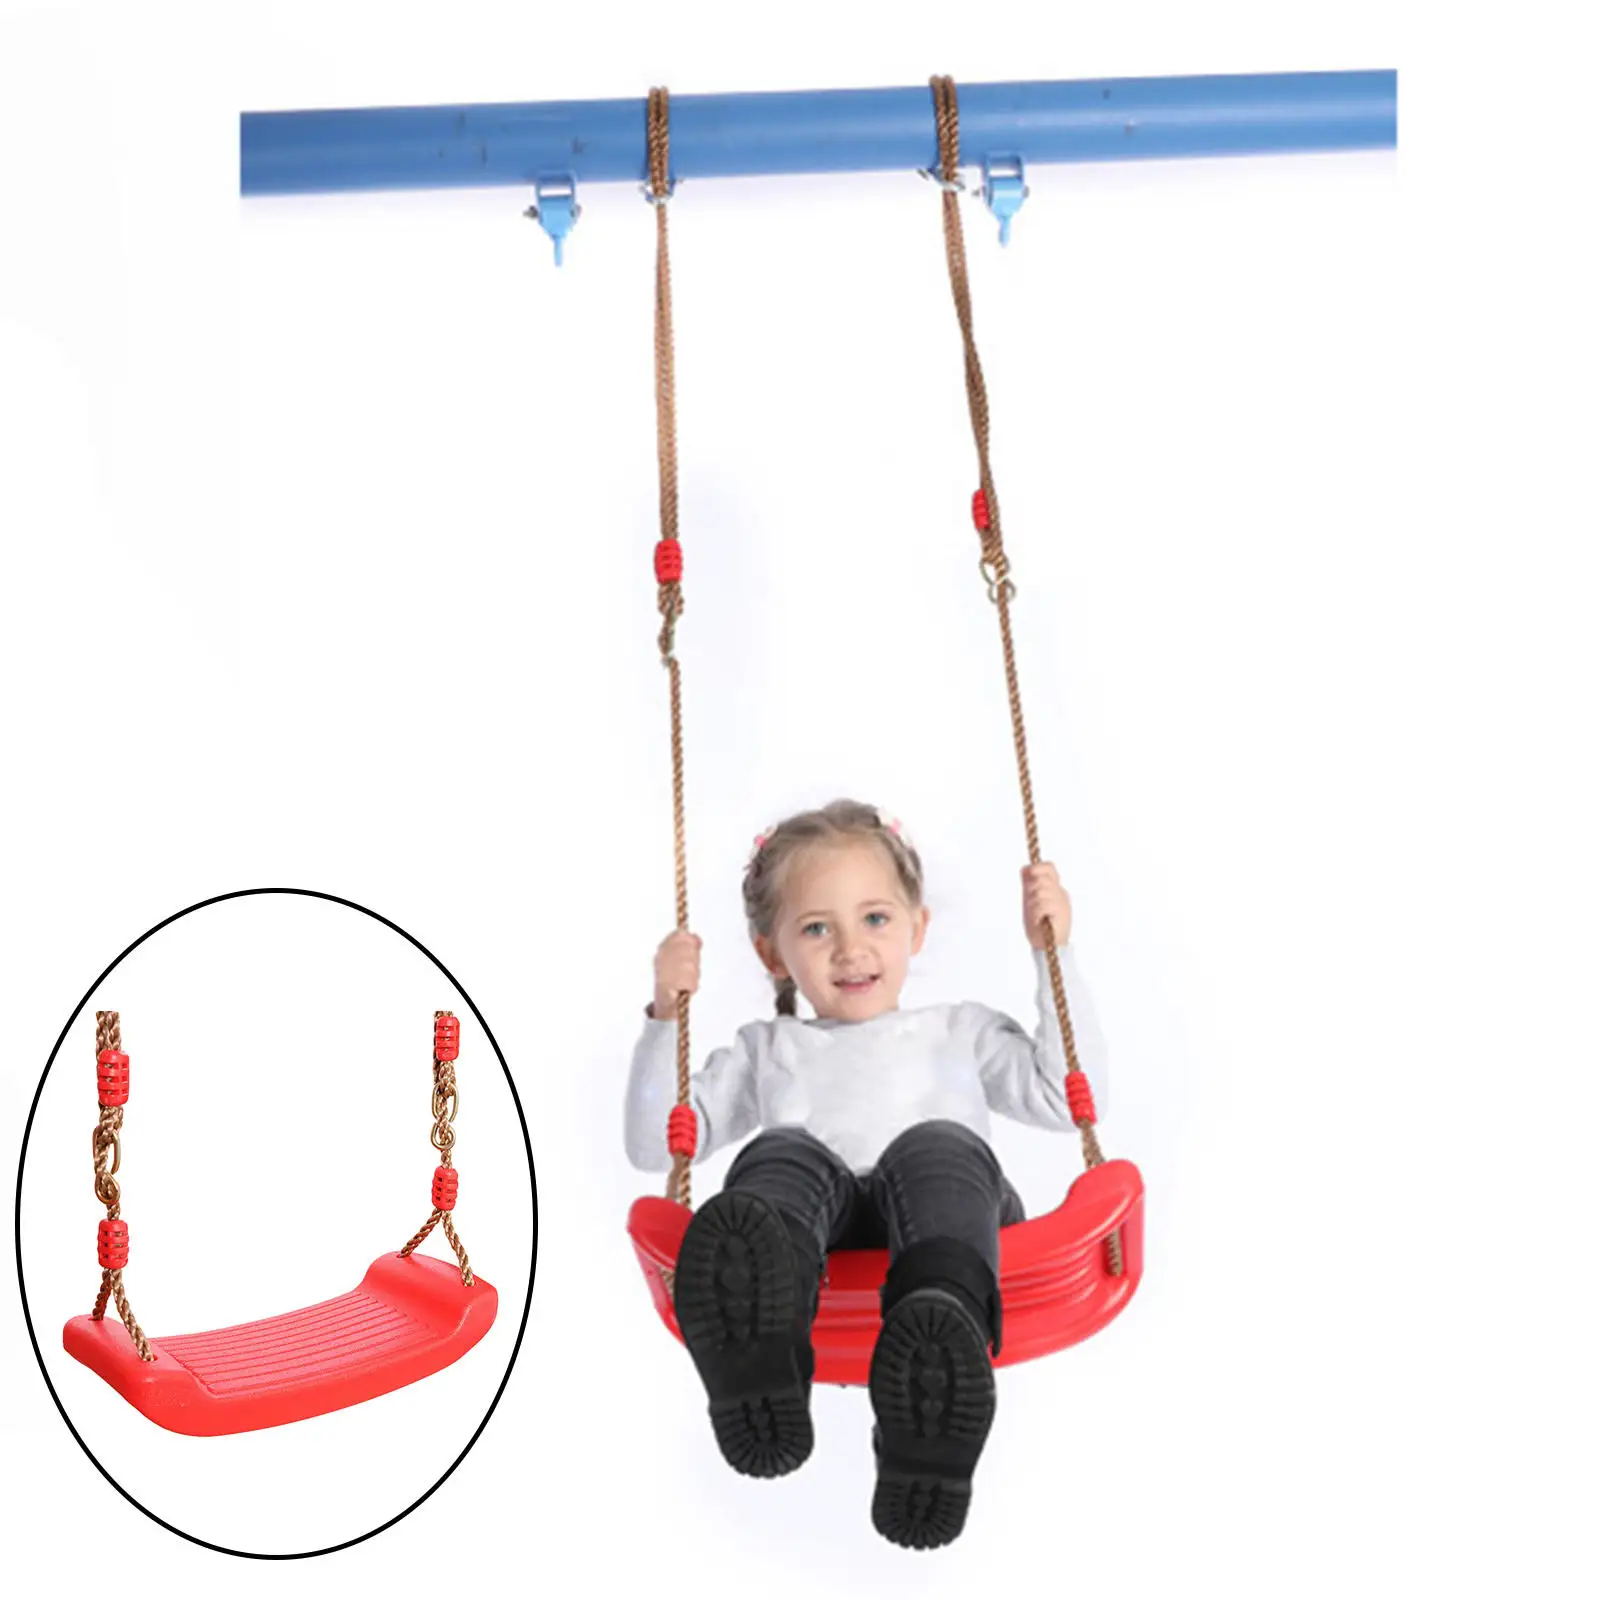 Swing Seat Set Entertainment Curved Board Playset Rope Adjustable Rainbow Swing Chair Flying Toy for Jungle Outdoor Indoor Adult